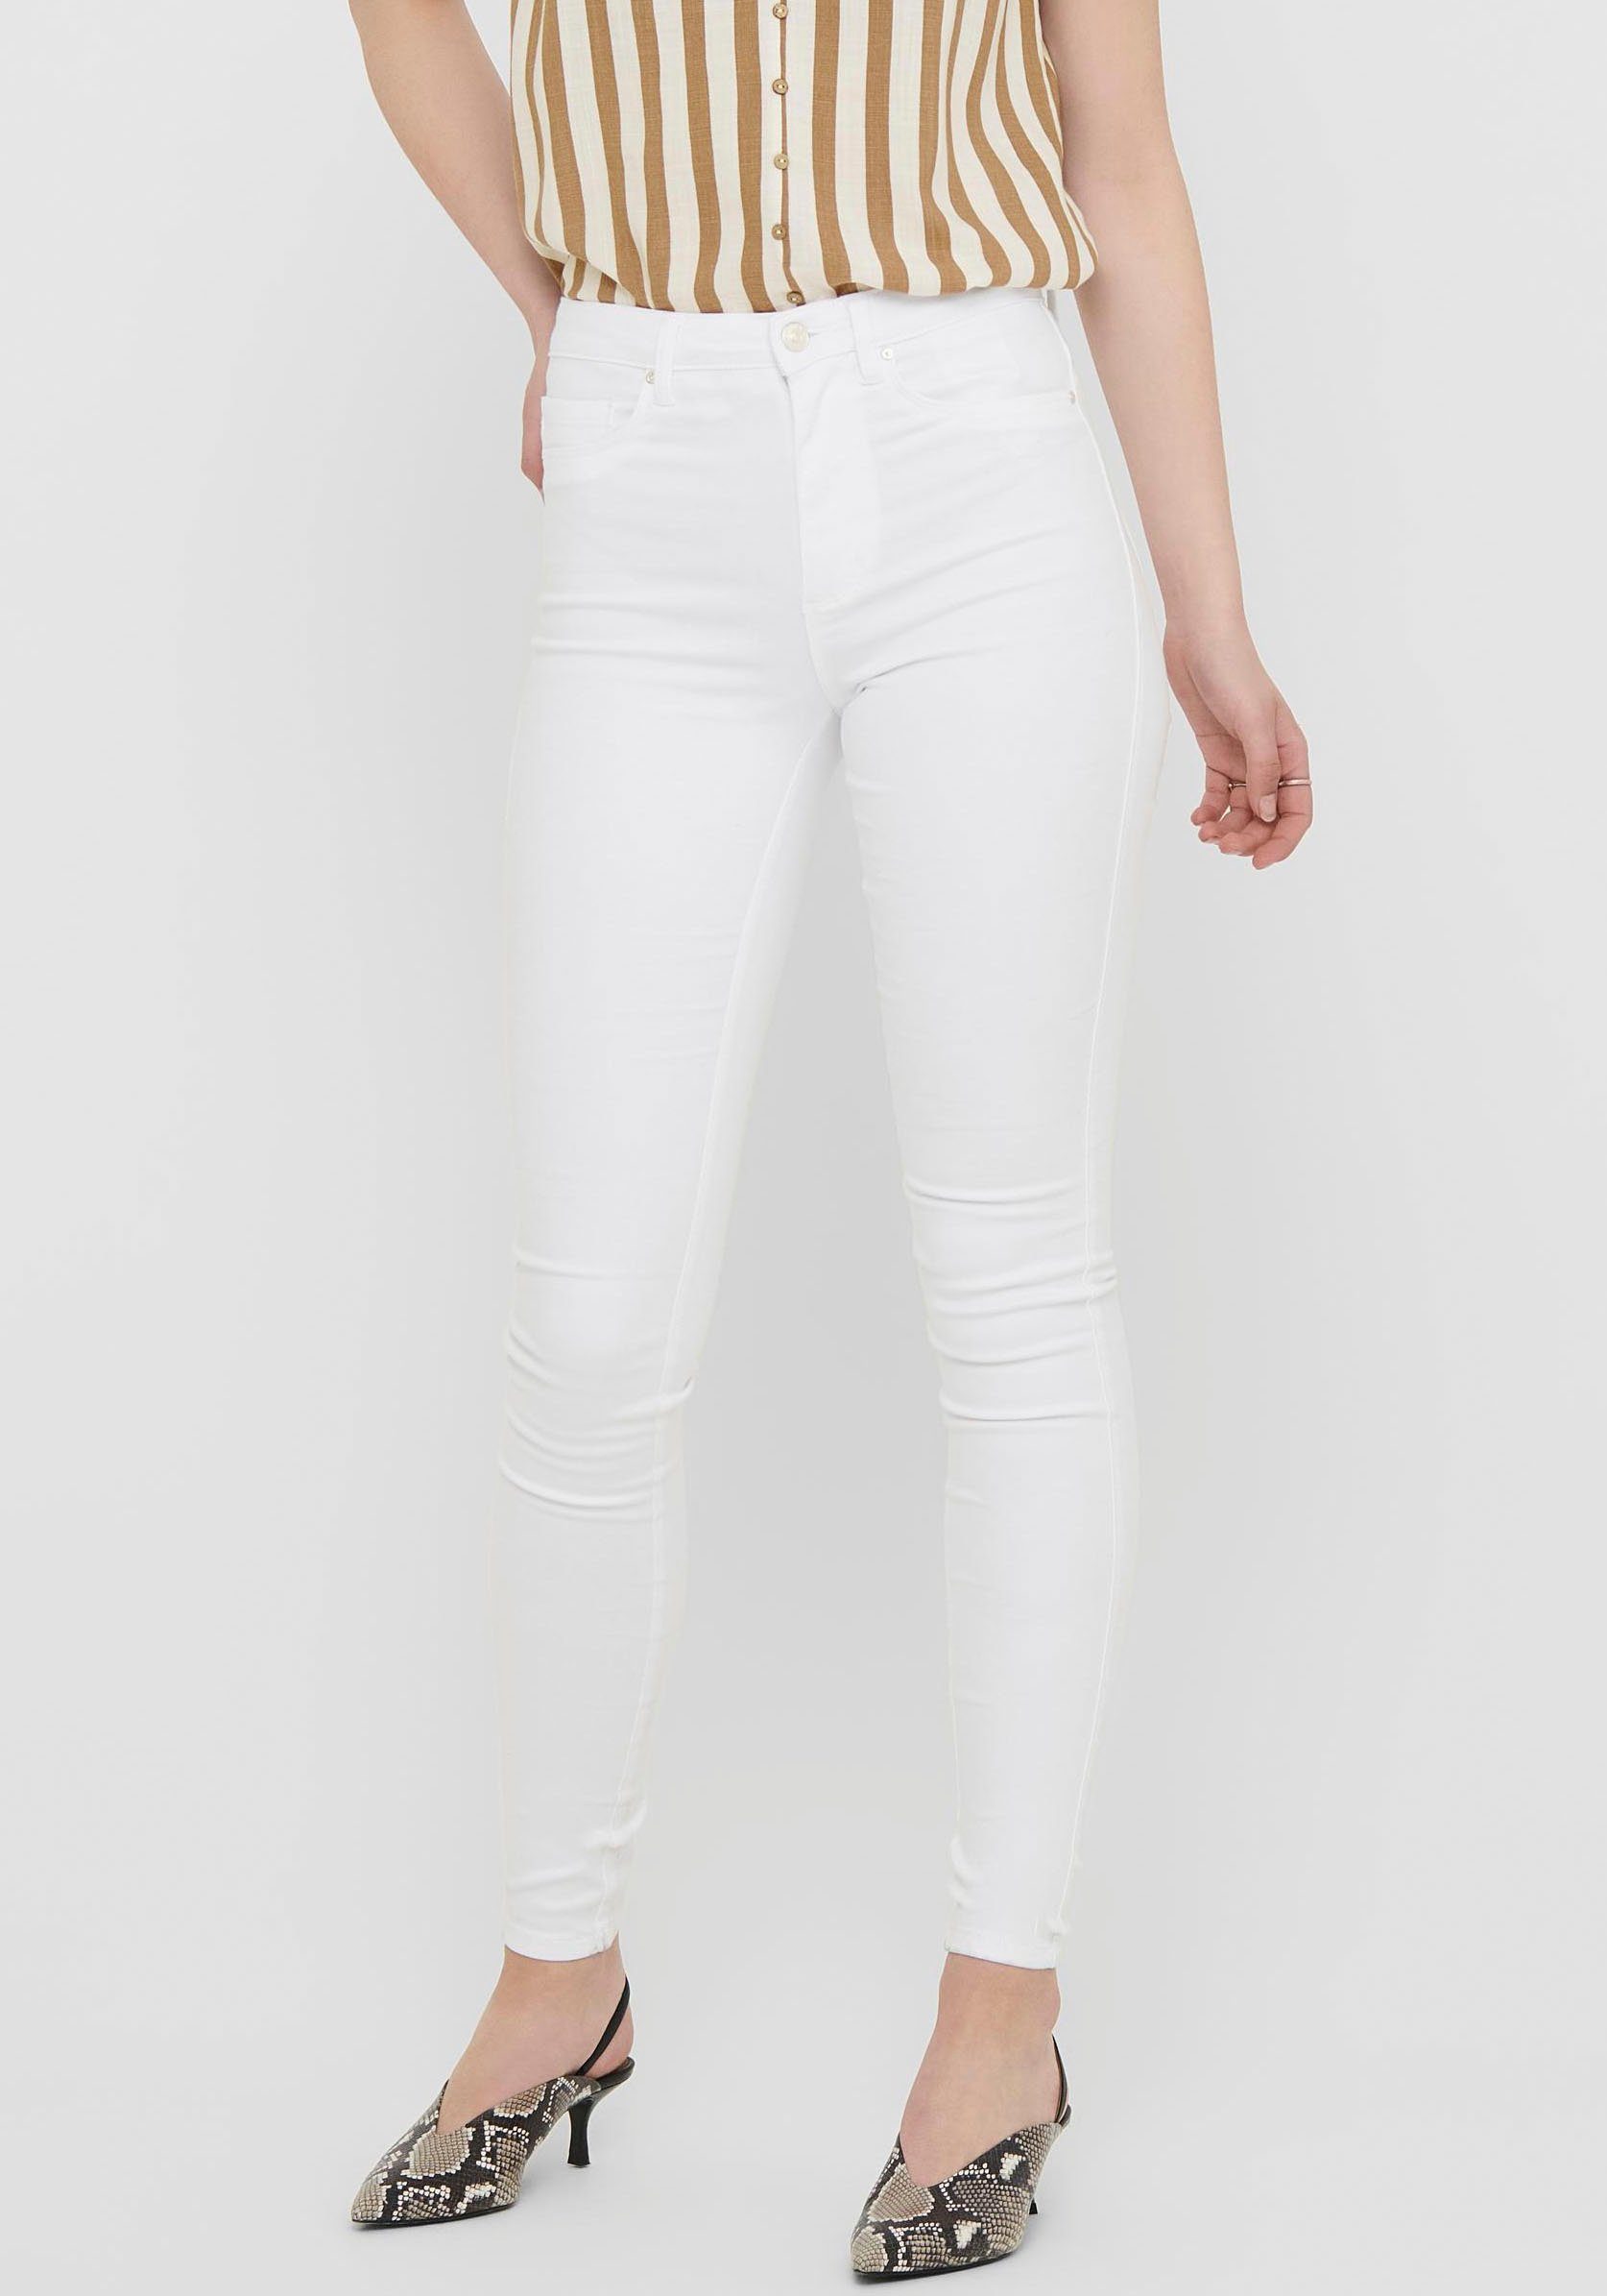 ONLY Skinny-fit-Jeans ONLROYAL HW SK JEANS DNM WHITE NOOS